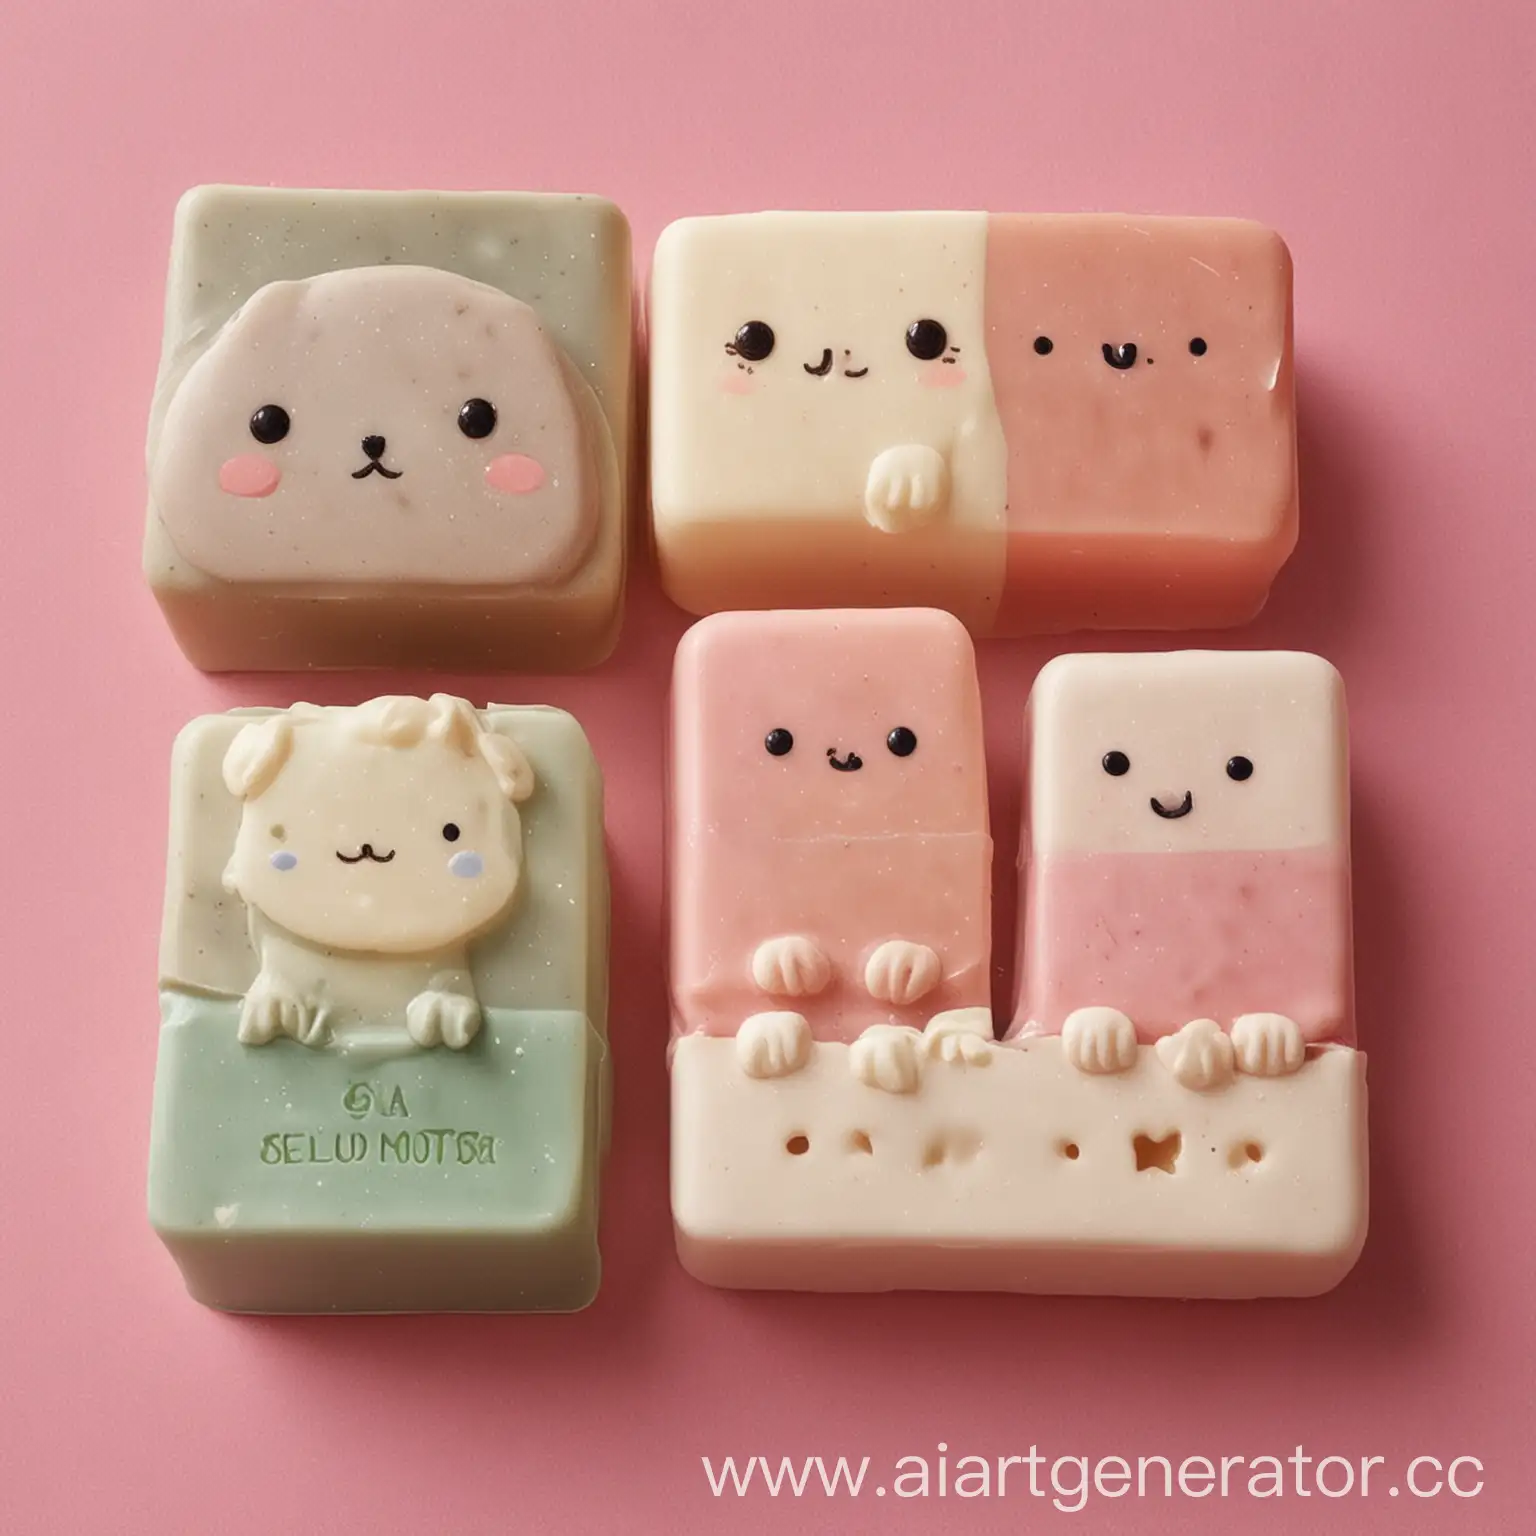 Adorable-Handcrafted-Soap-Bars-with-Playful-Designs